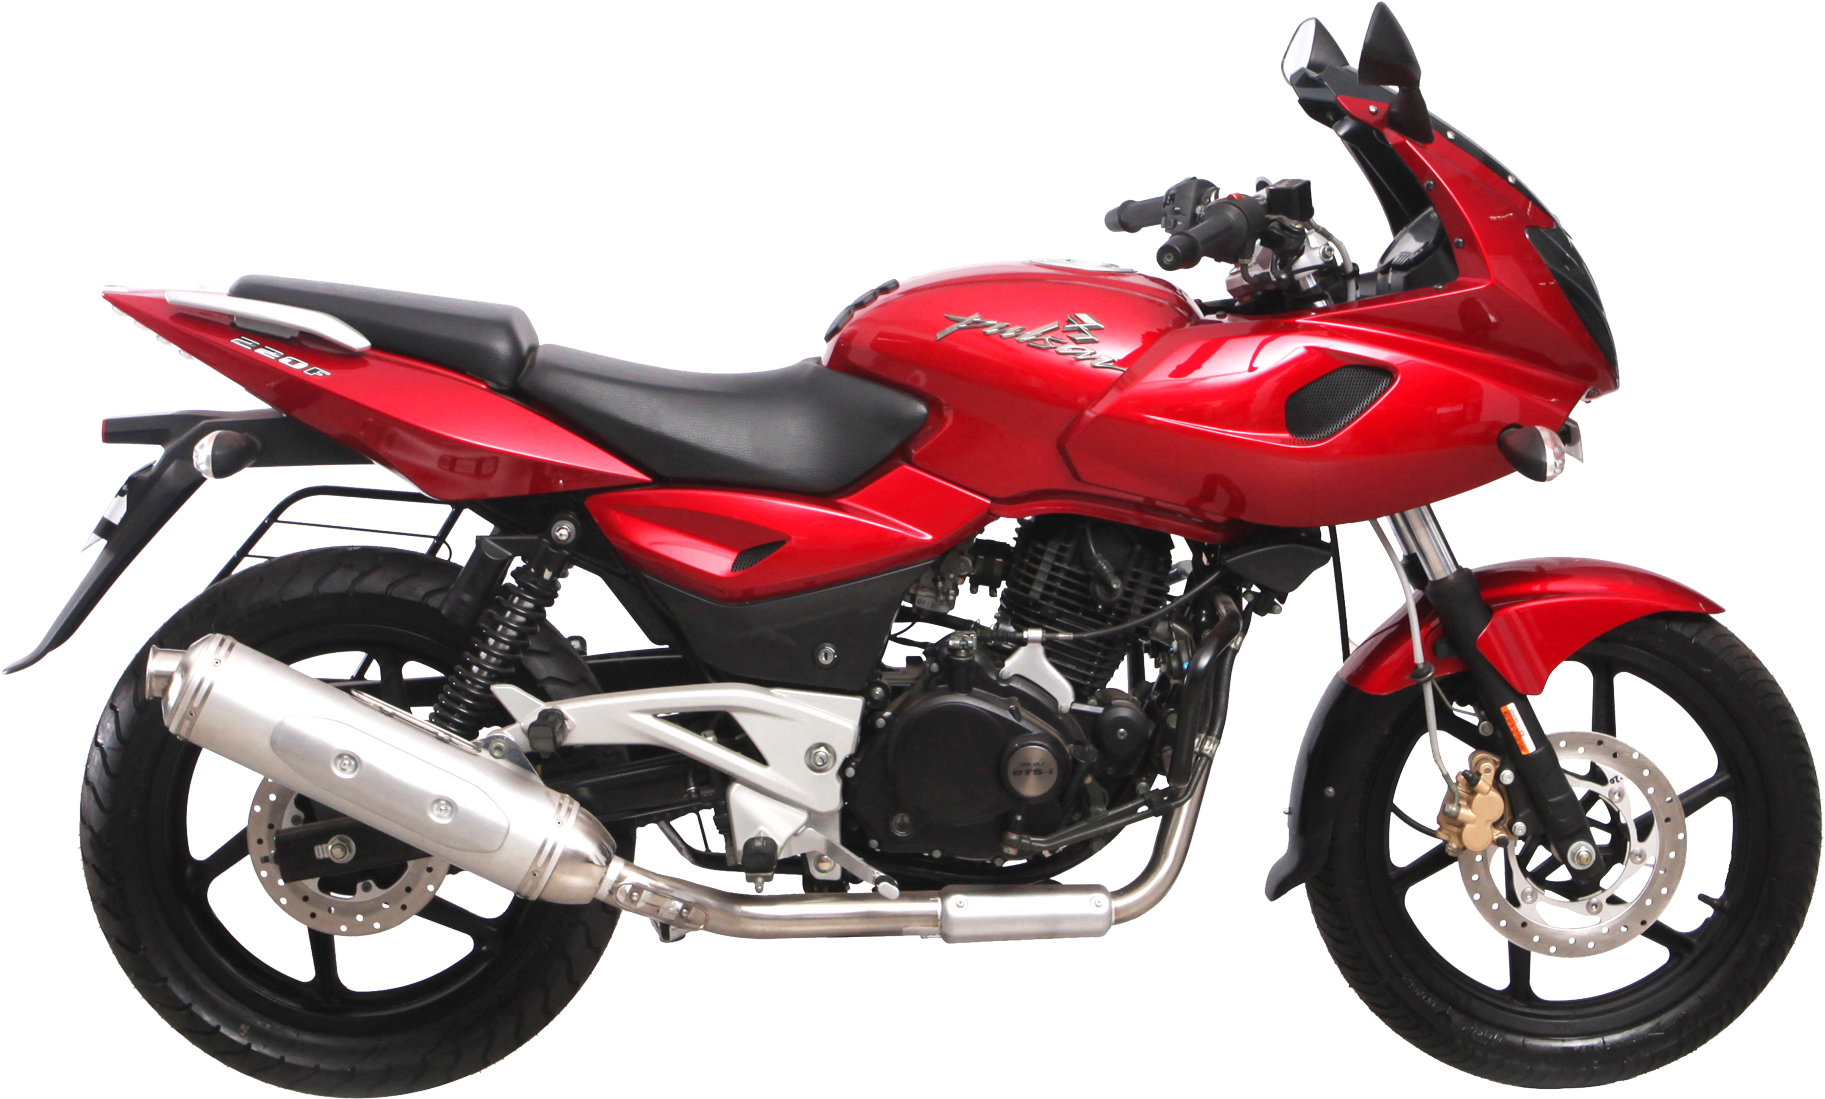 A Red And Black Motorcycle